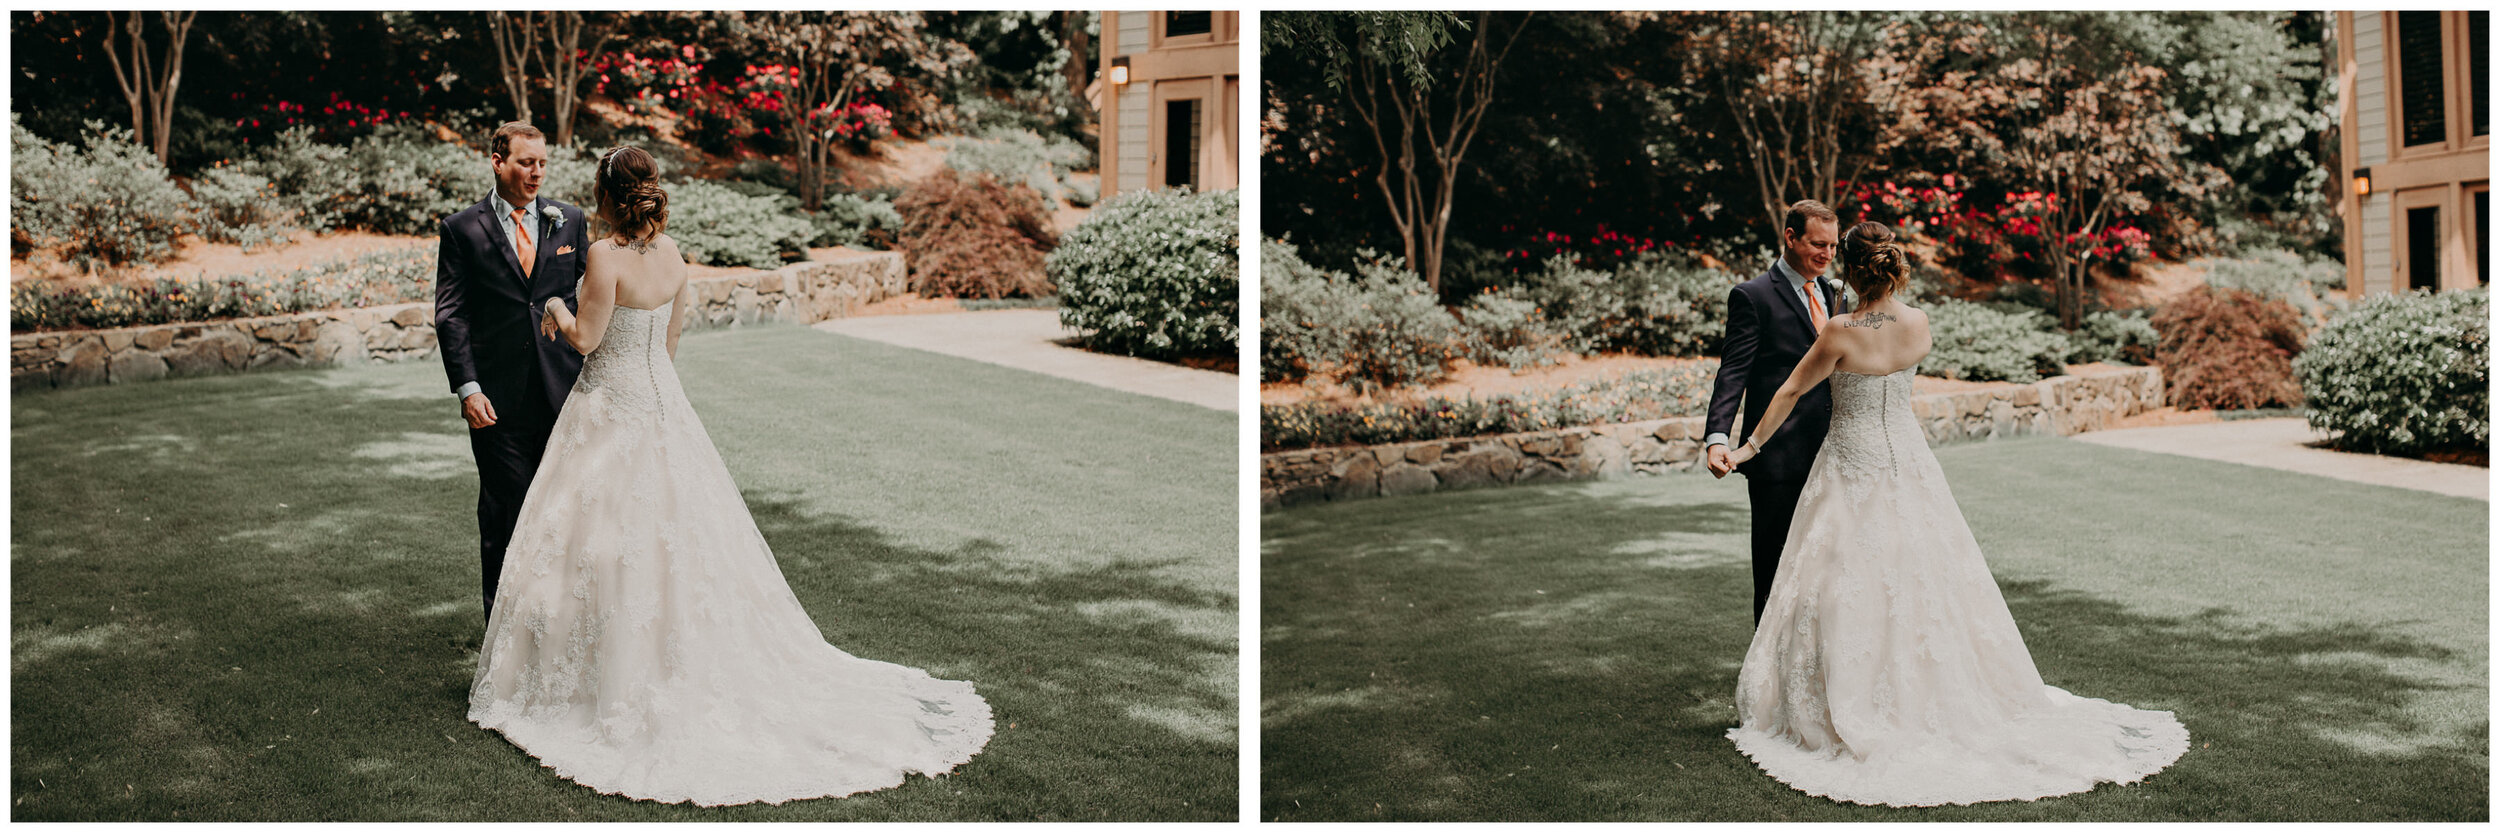 Christa & Ben's Wedding Day || Atlanta Spring Wedding at The Country Club of The South27.jpg